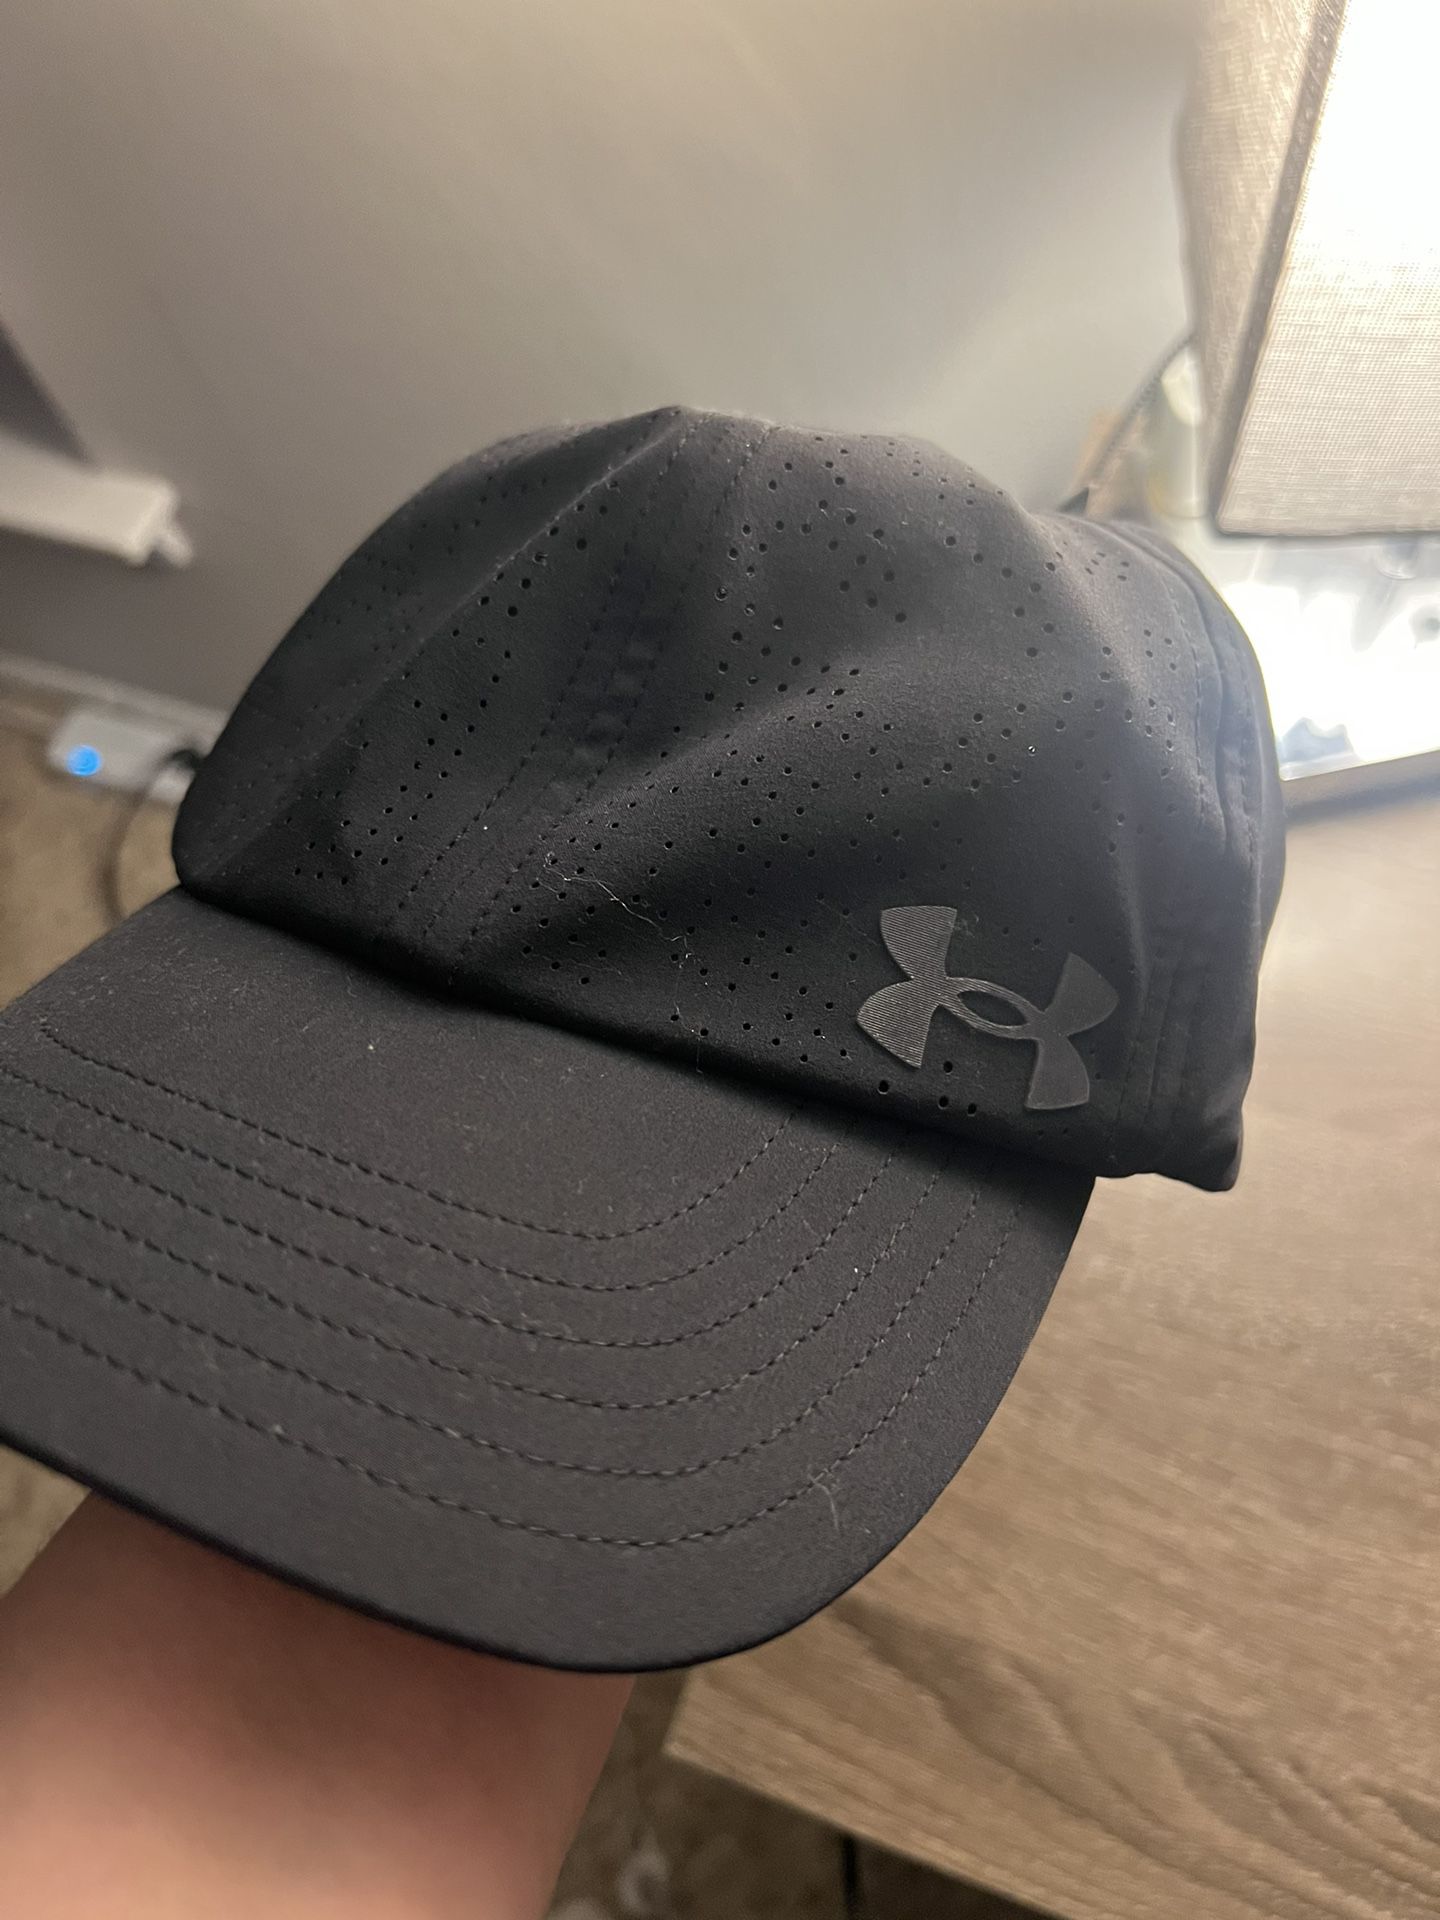 Brand New Under Armory Hat With Tags 